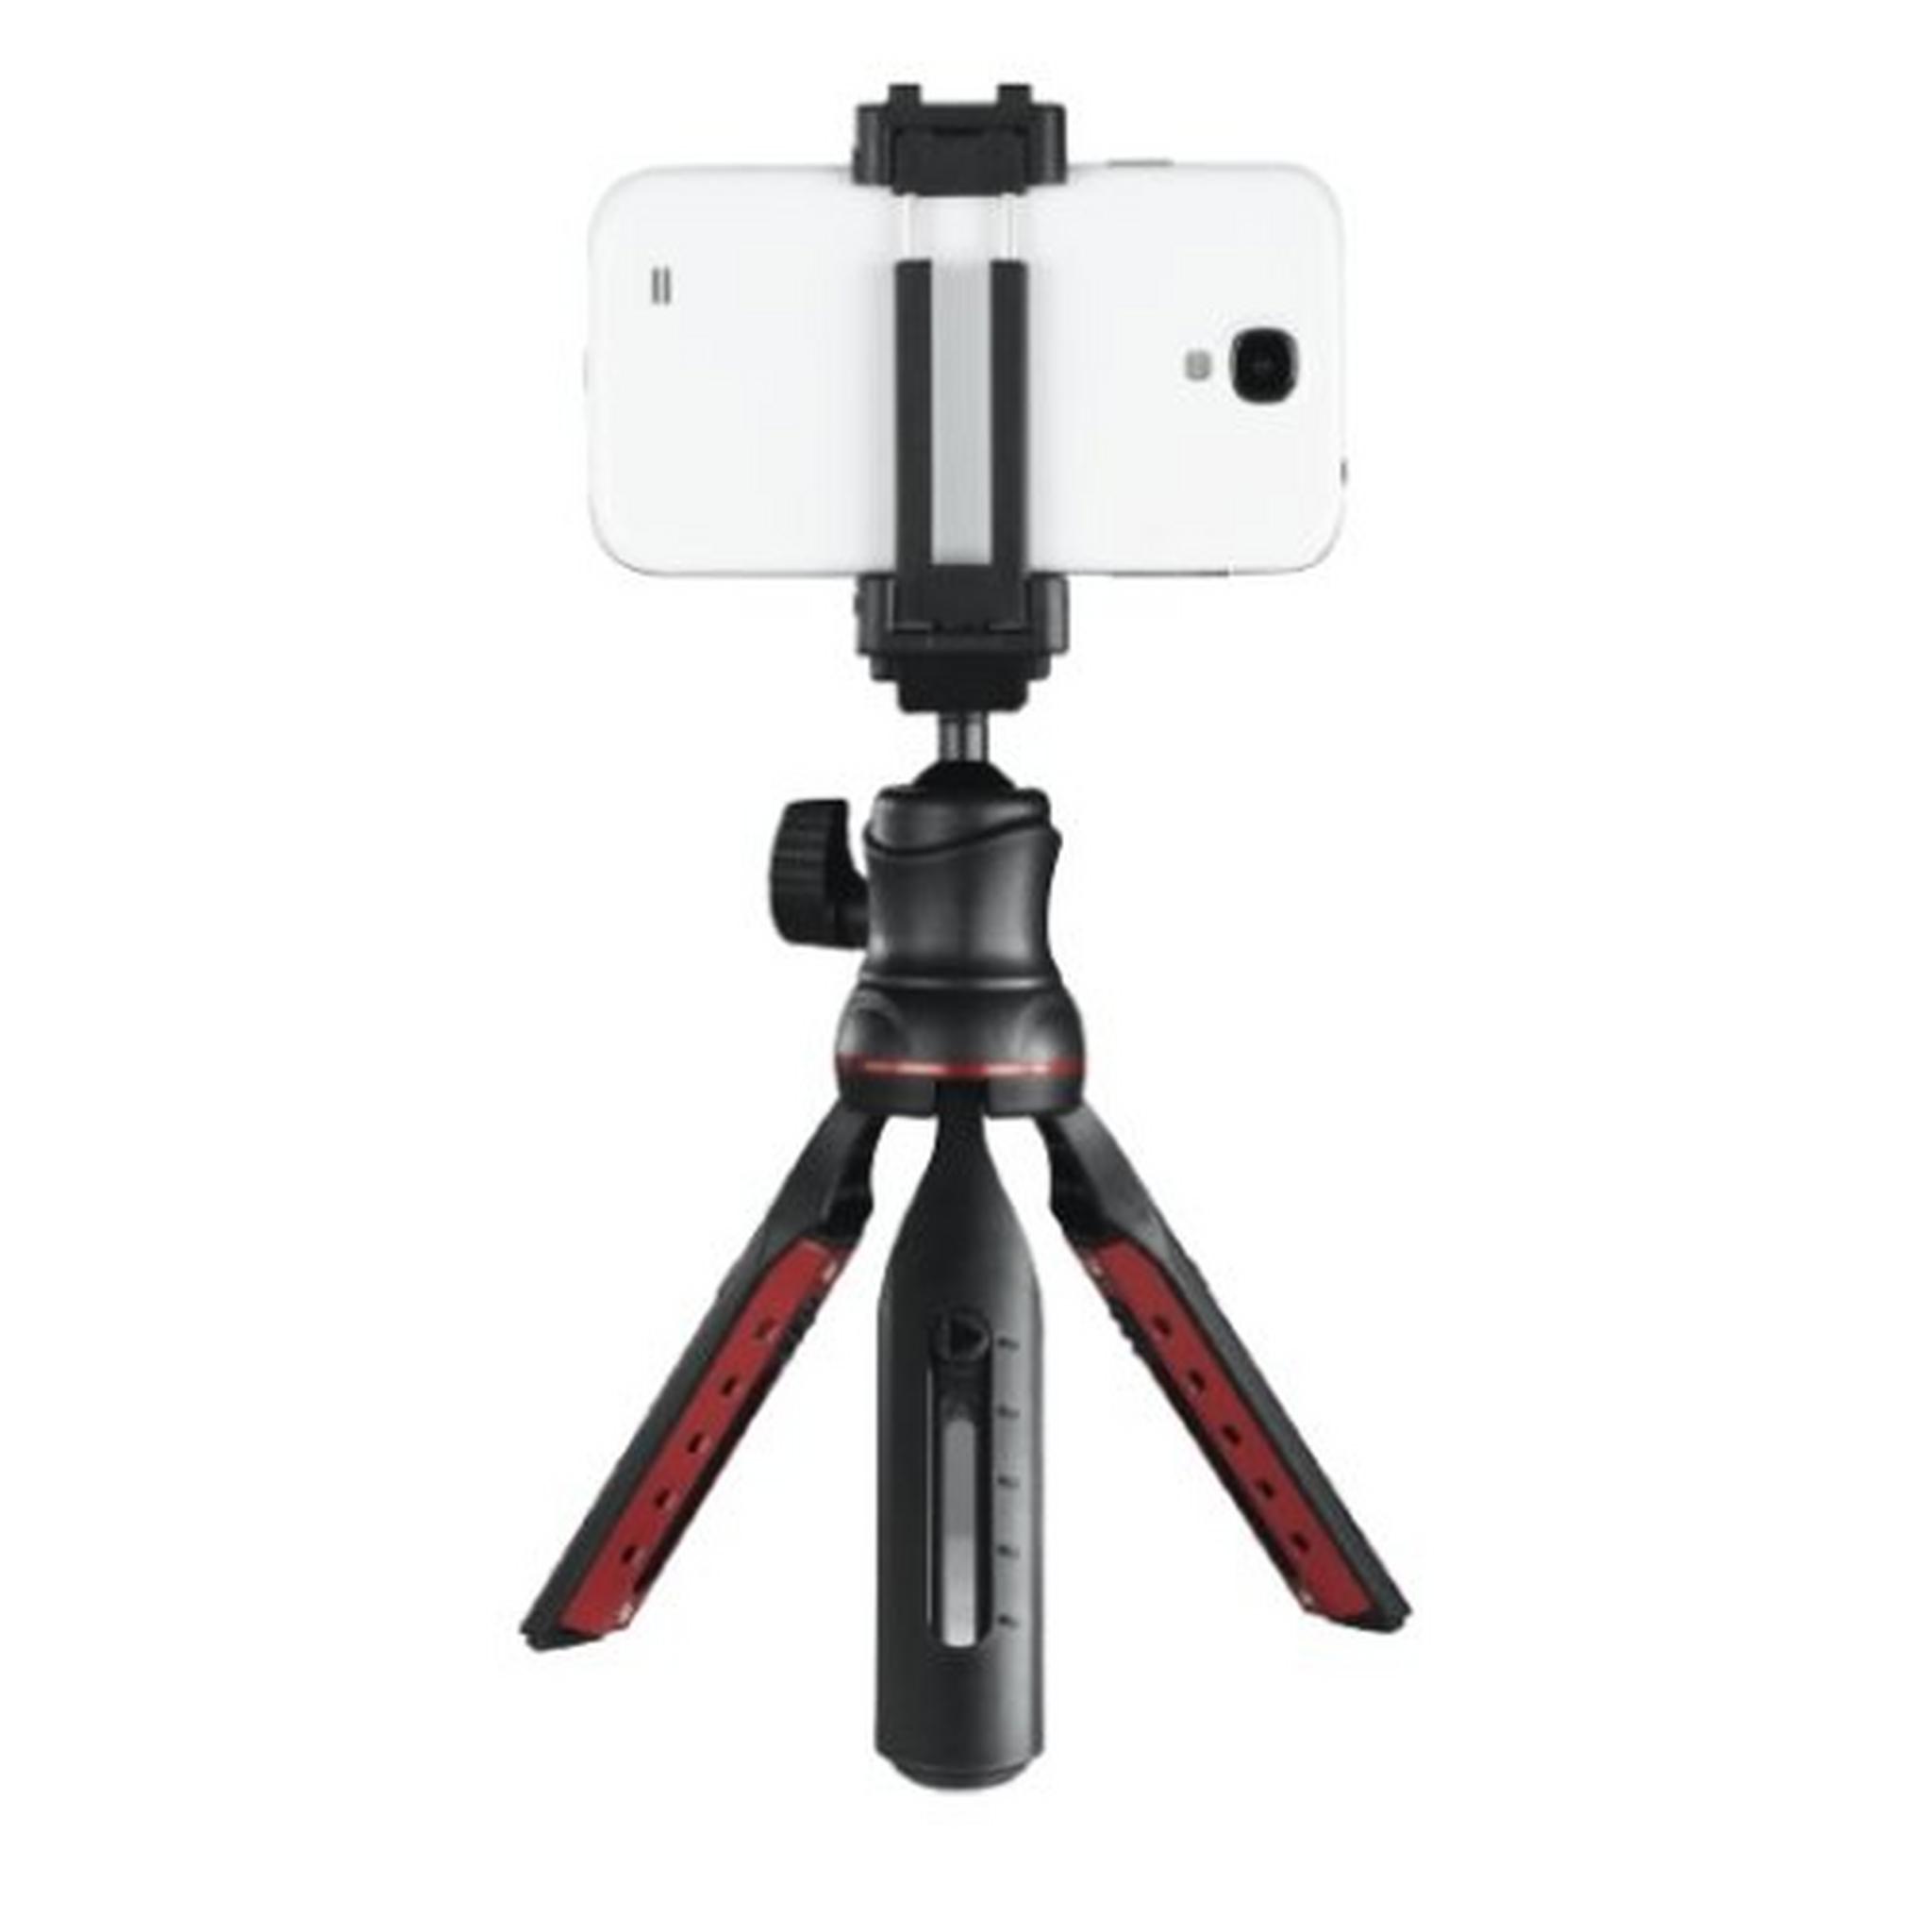 Hama Solid II 21B Table Tripod with BRS2 Bluetooth Remote Trigger